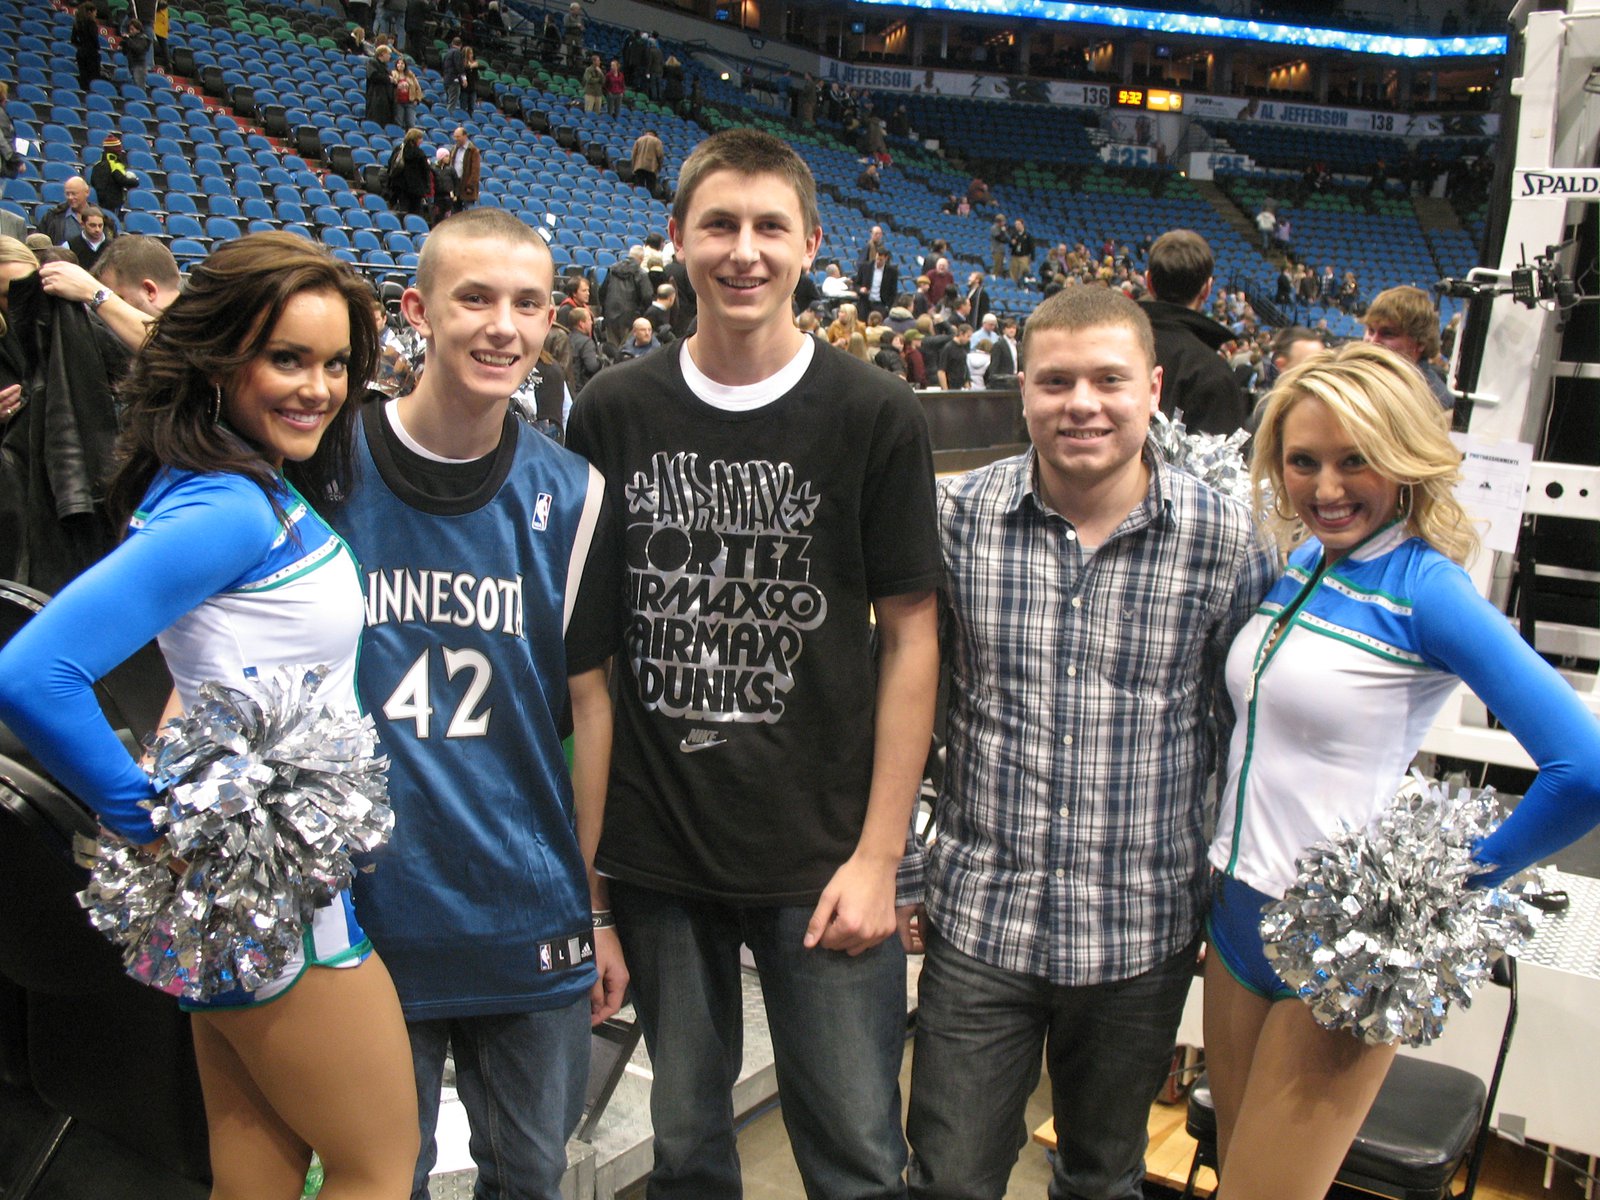 At the Timberwolves game